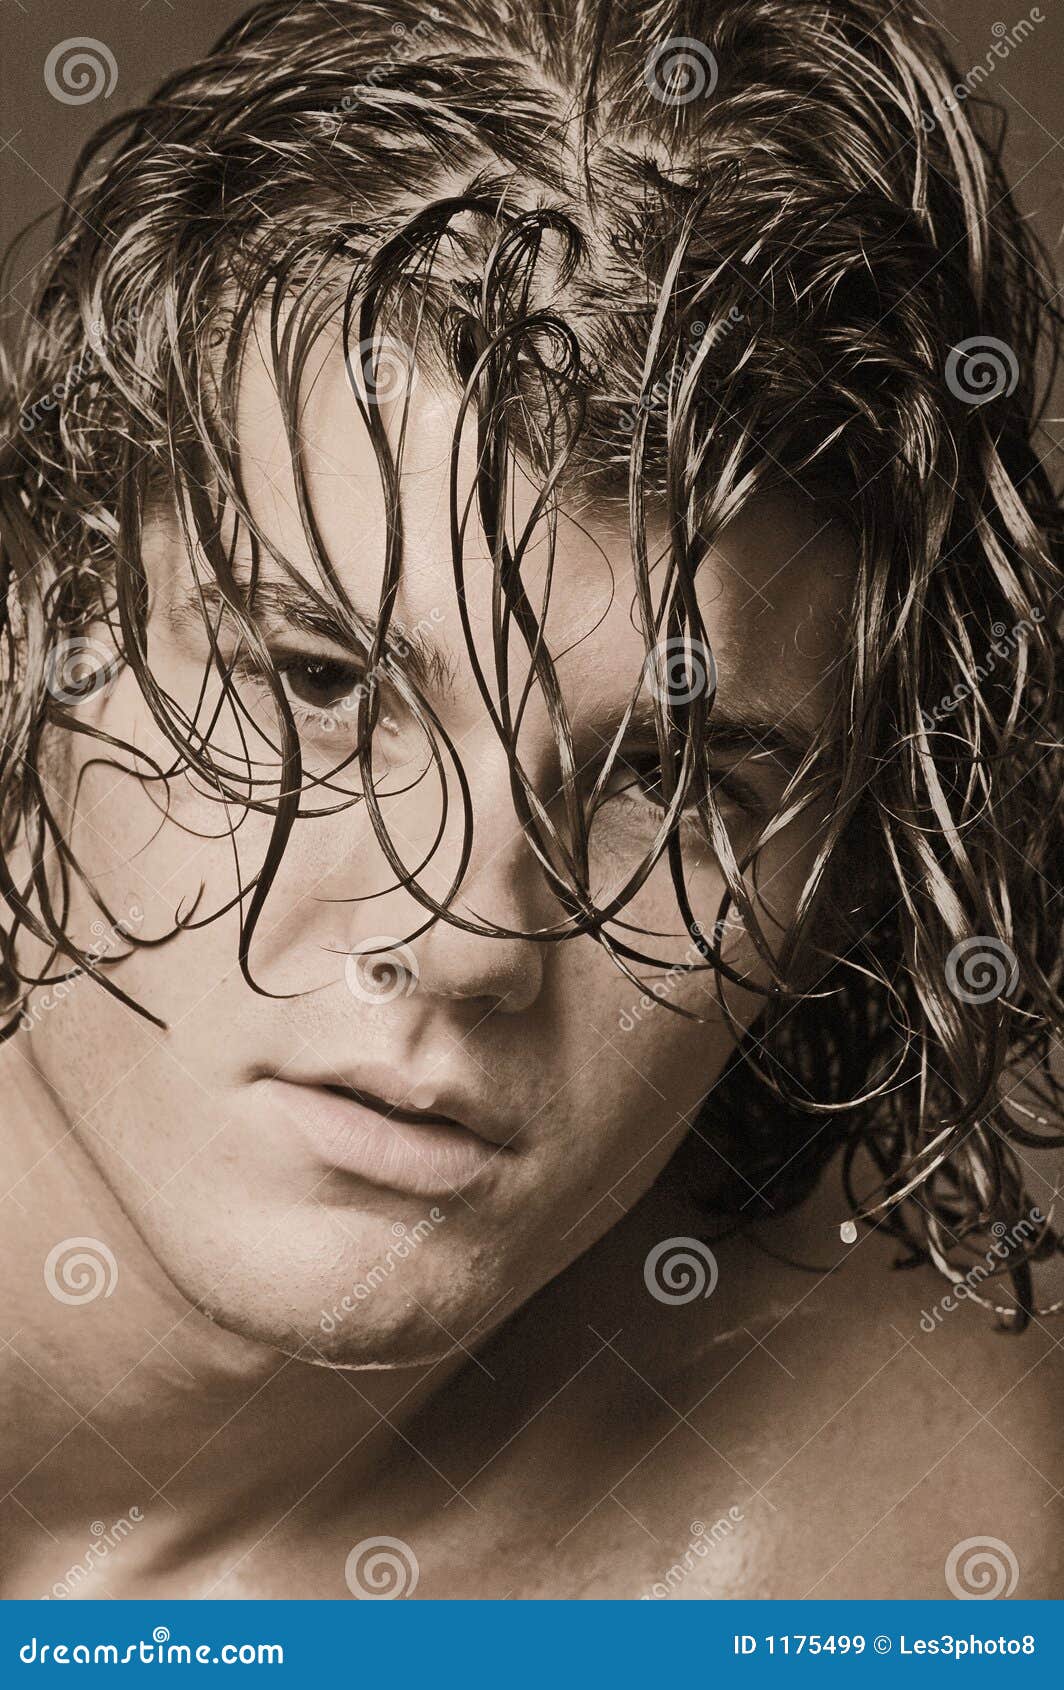 Male With Long Hair And Bangs Stock Image - Image of 